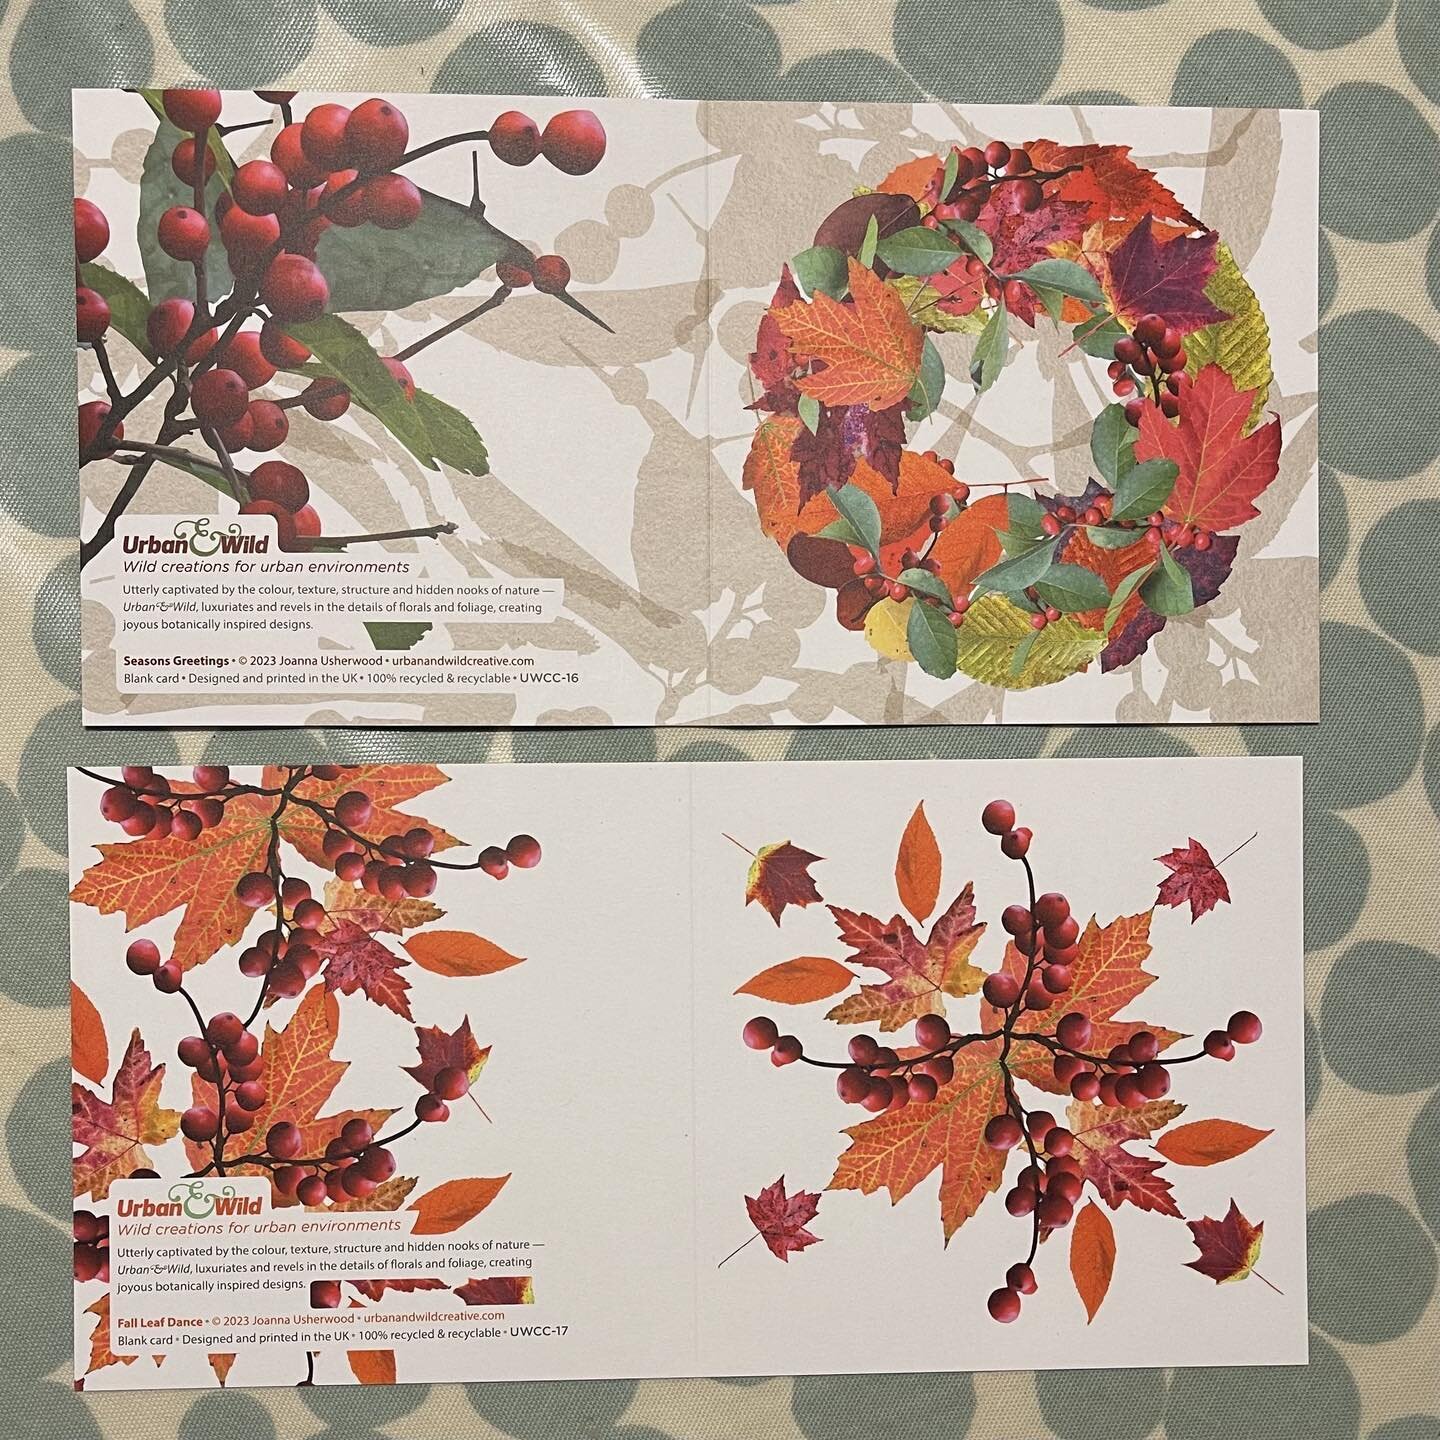 These two new cards are titled &lsquo;Seasons Greetings&rsquo; and &lsquo;Fall Leaf Dance&rsquo;. They are made from the many hundreds of photos I took of autumn fall leaves this year. I wanted to have some cards that celebrate the season because not